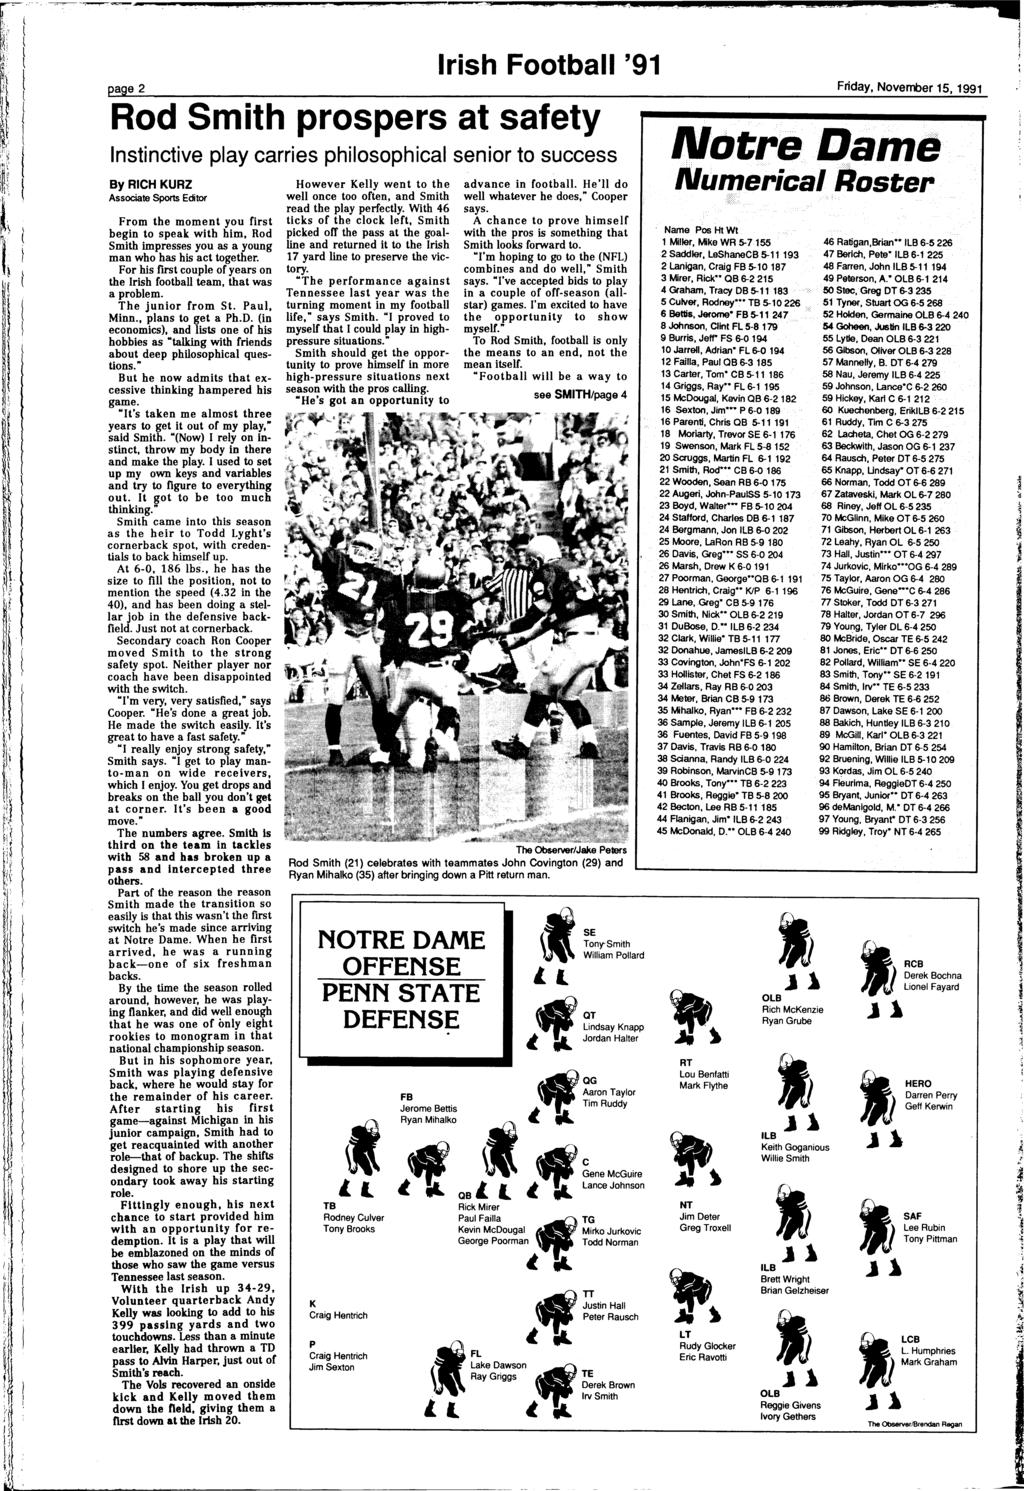 ; 'l J rish Football '91 page 2 Rod Smith prospers at safety nstinctive play carries philosophical senior to success By RCH KURZ Associate Sports Editor From the moment you first begin to speak with